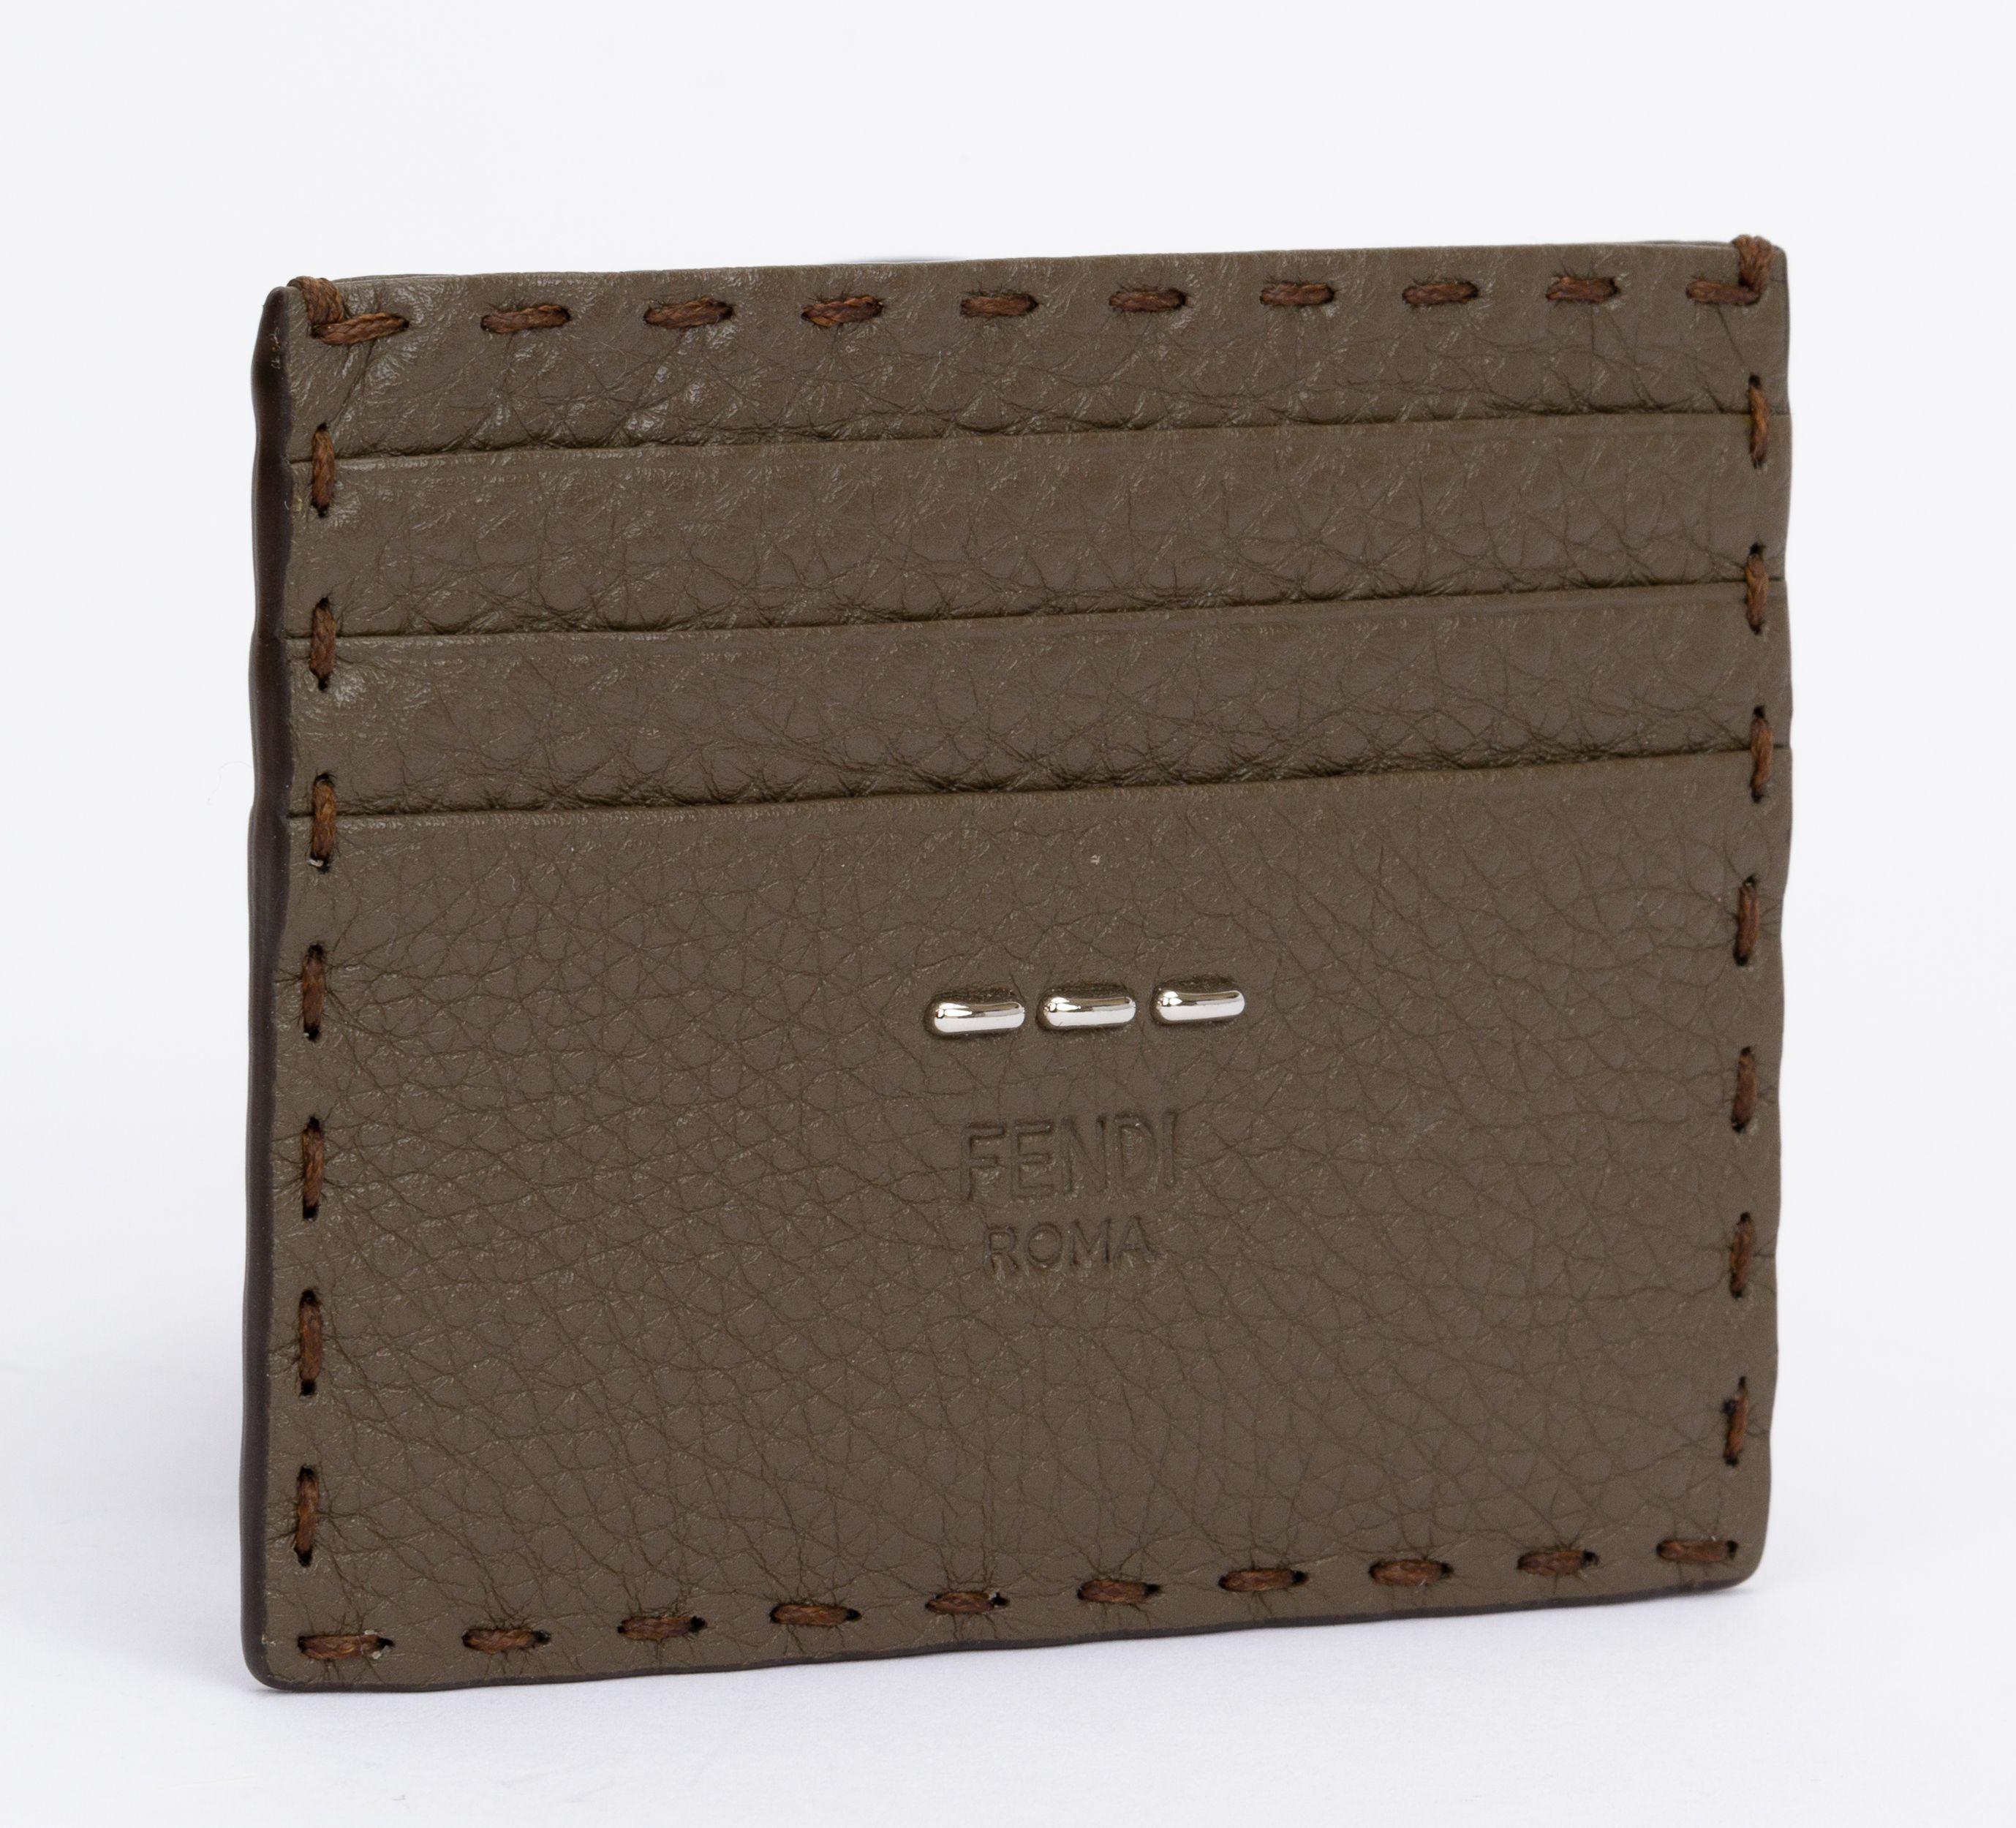 Fendi Selleria wallet made of leather in etoupe and the edges are stitched up. The piece has 6 card holders and is brand new. The piece includes the tag, booklet, original box and dust cover.